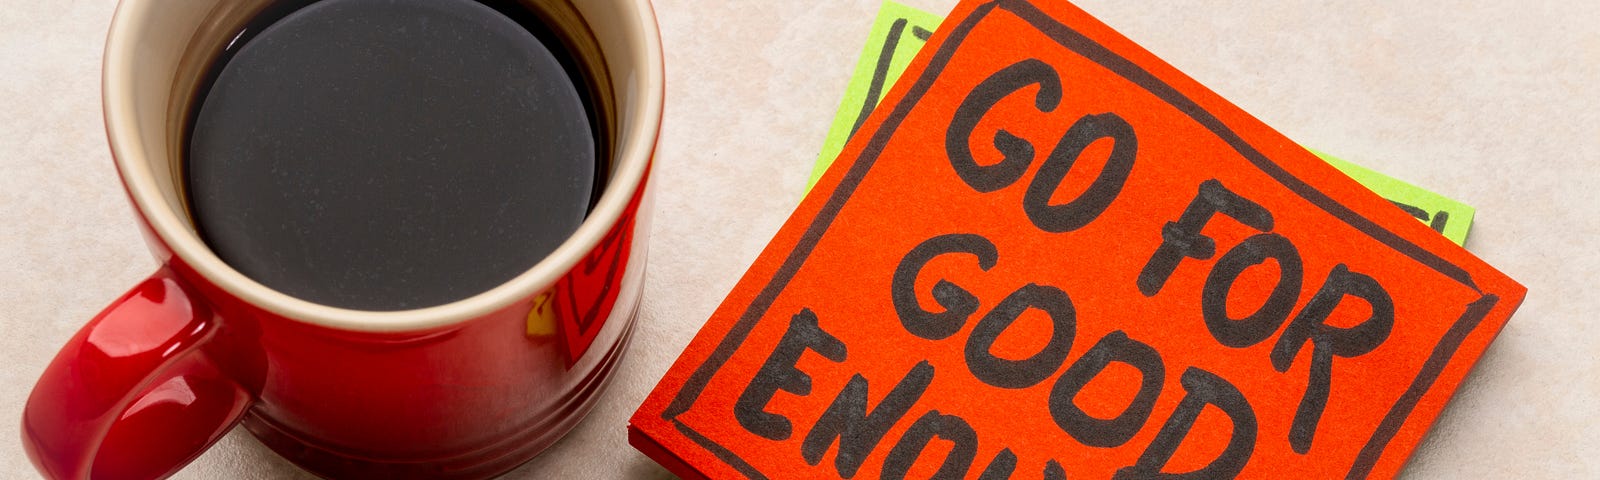 Coffee cup with note saying “Go For Good Enough”.